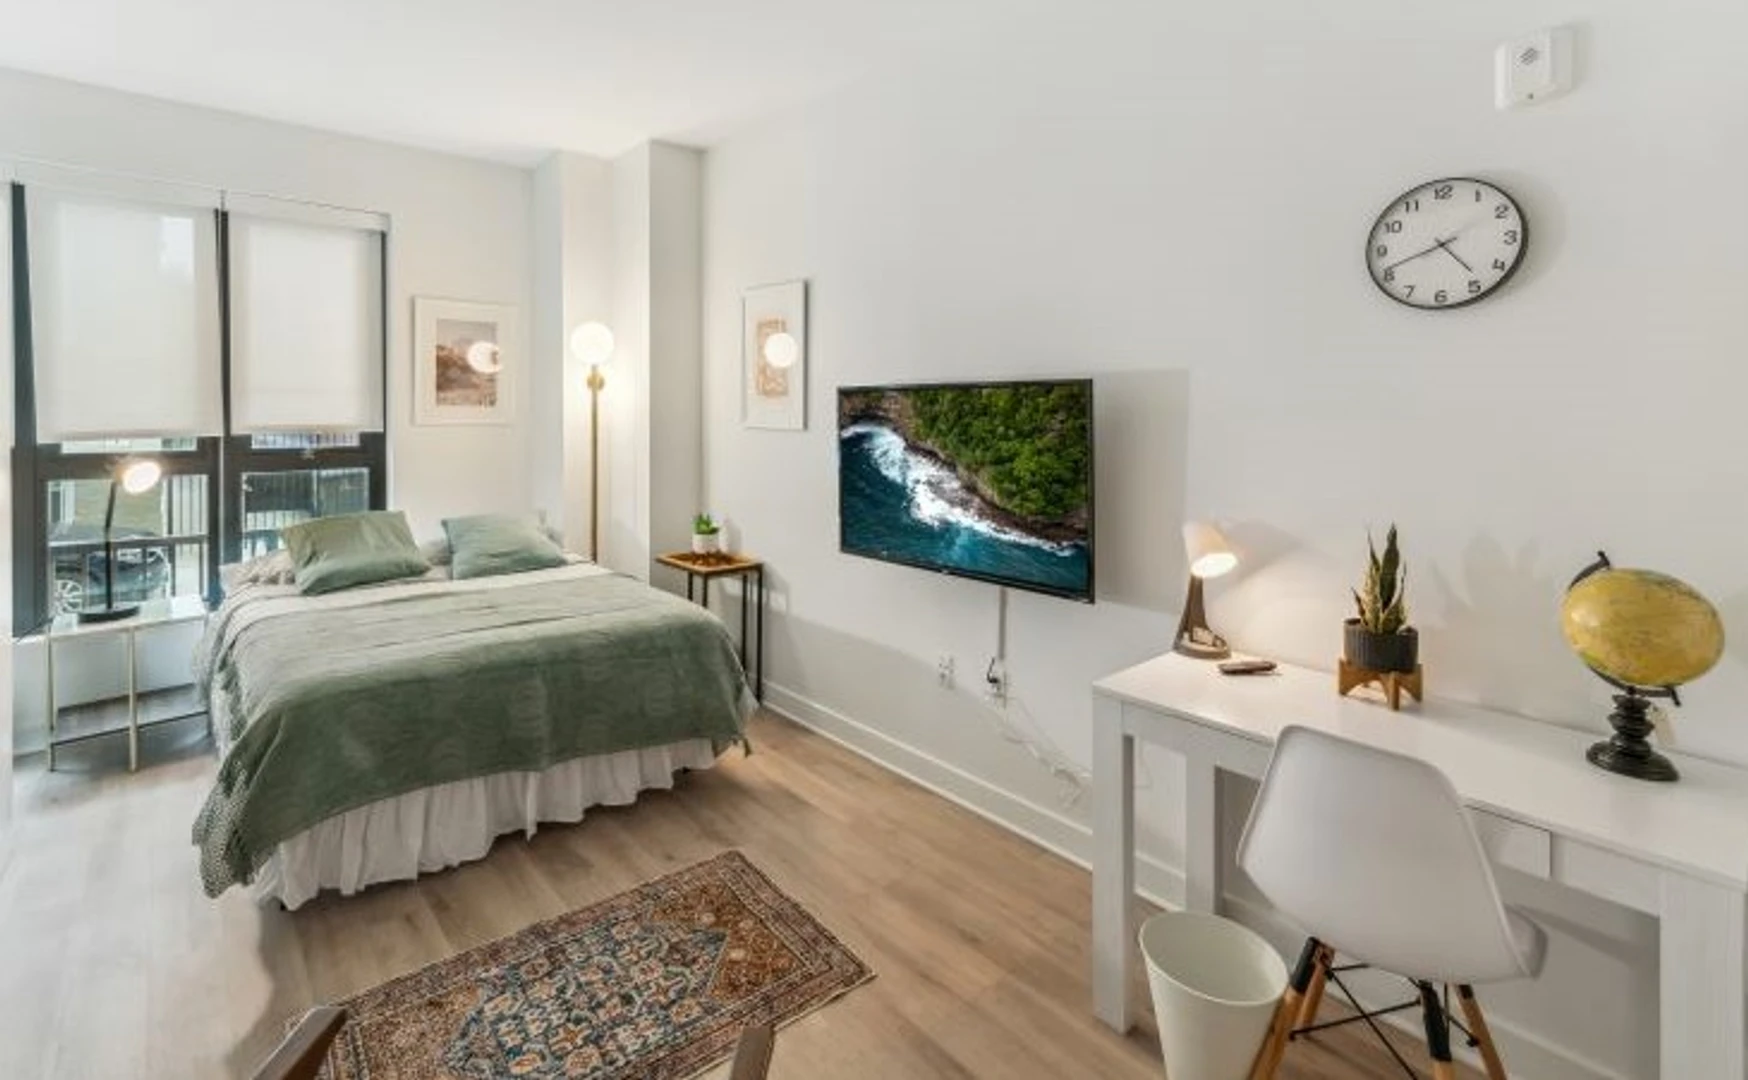 Renting rooms by the month in Vancouver